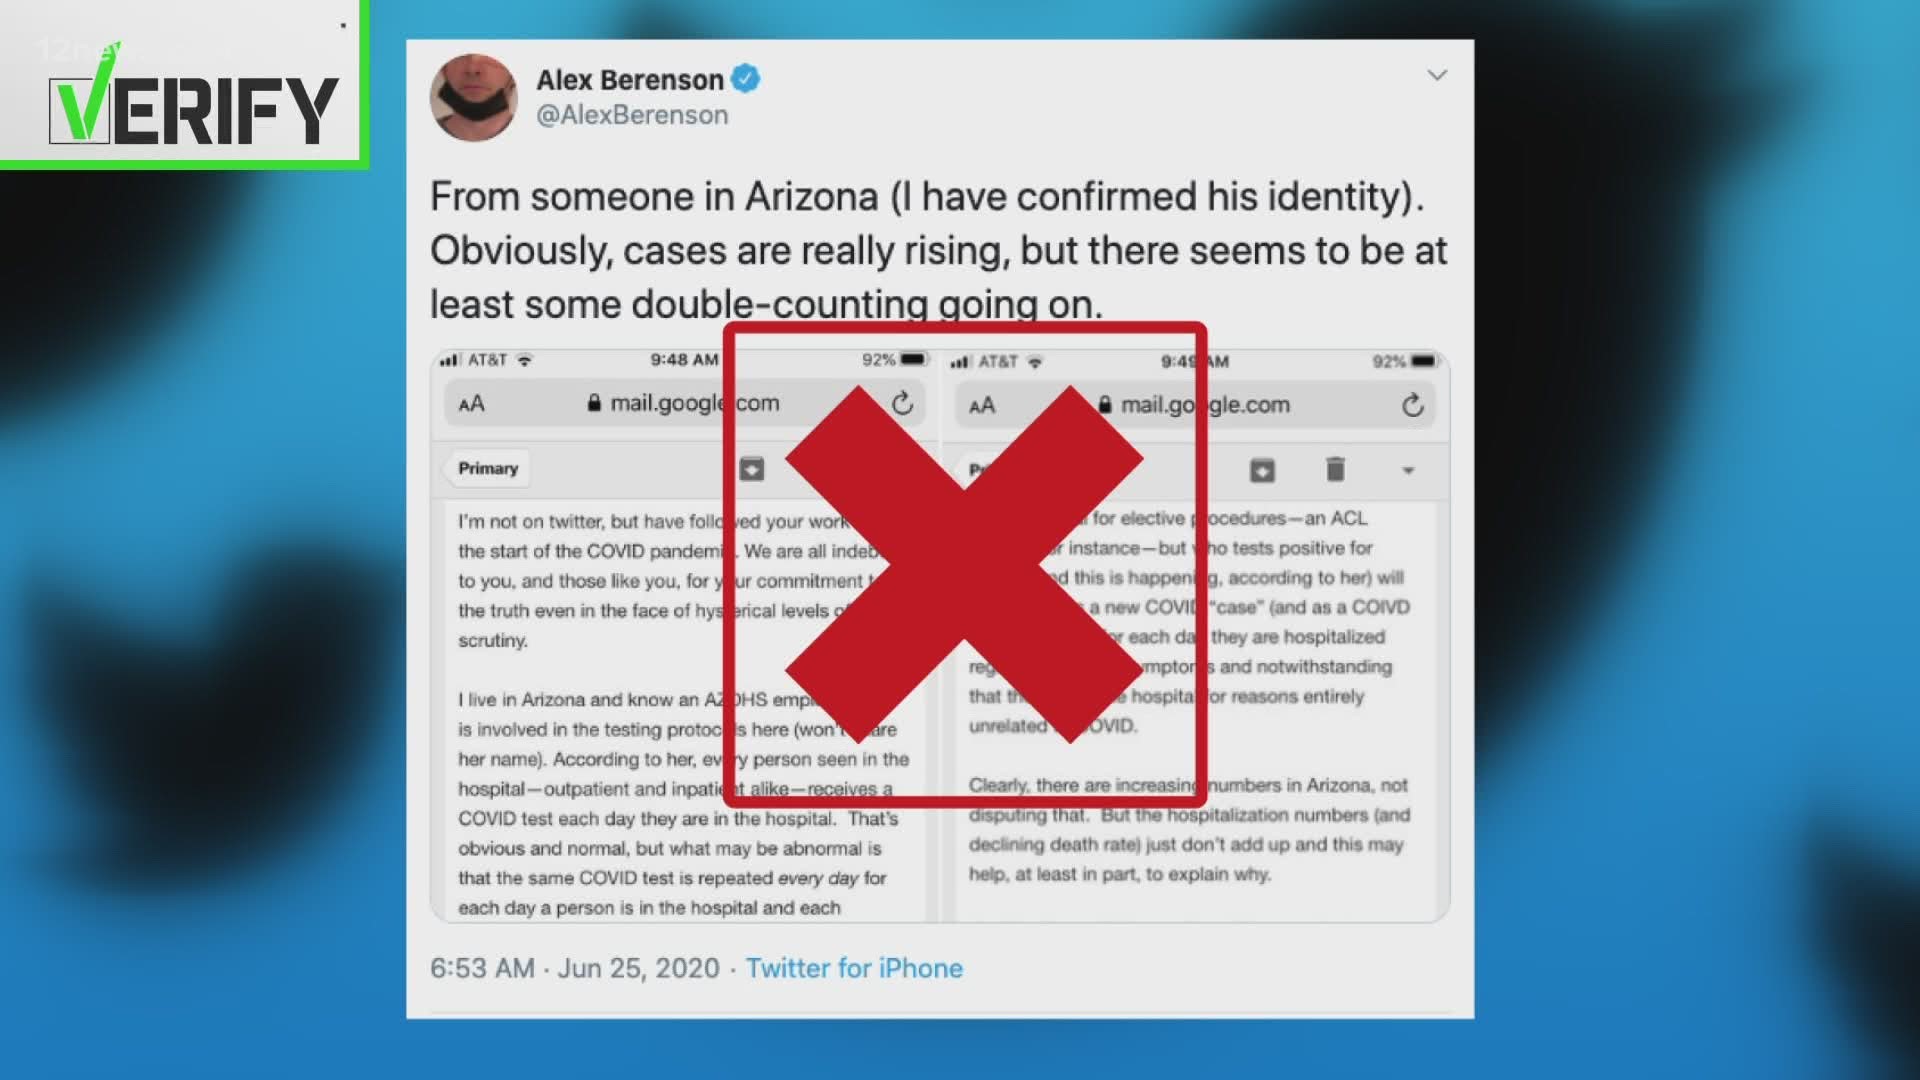 One of the leading skeptics of coronavirus reporting is taking aim at Arizona's case numbers. He was allegedly inspired by a message from someone in Arizona.